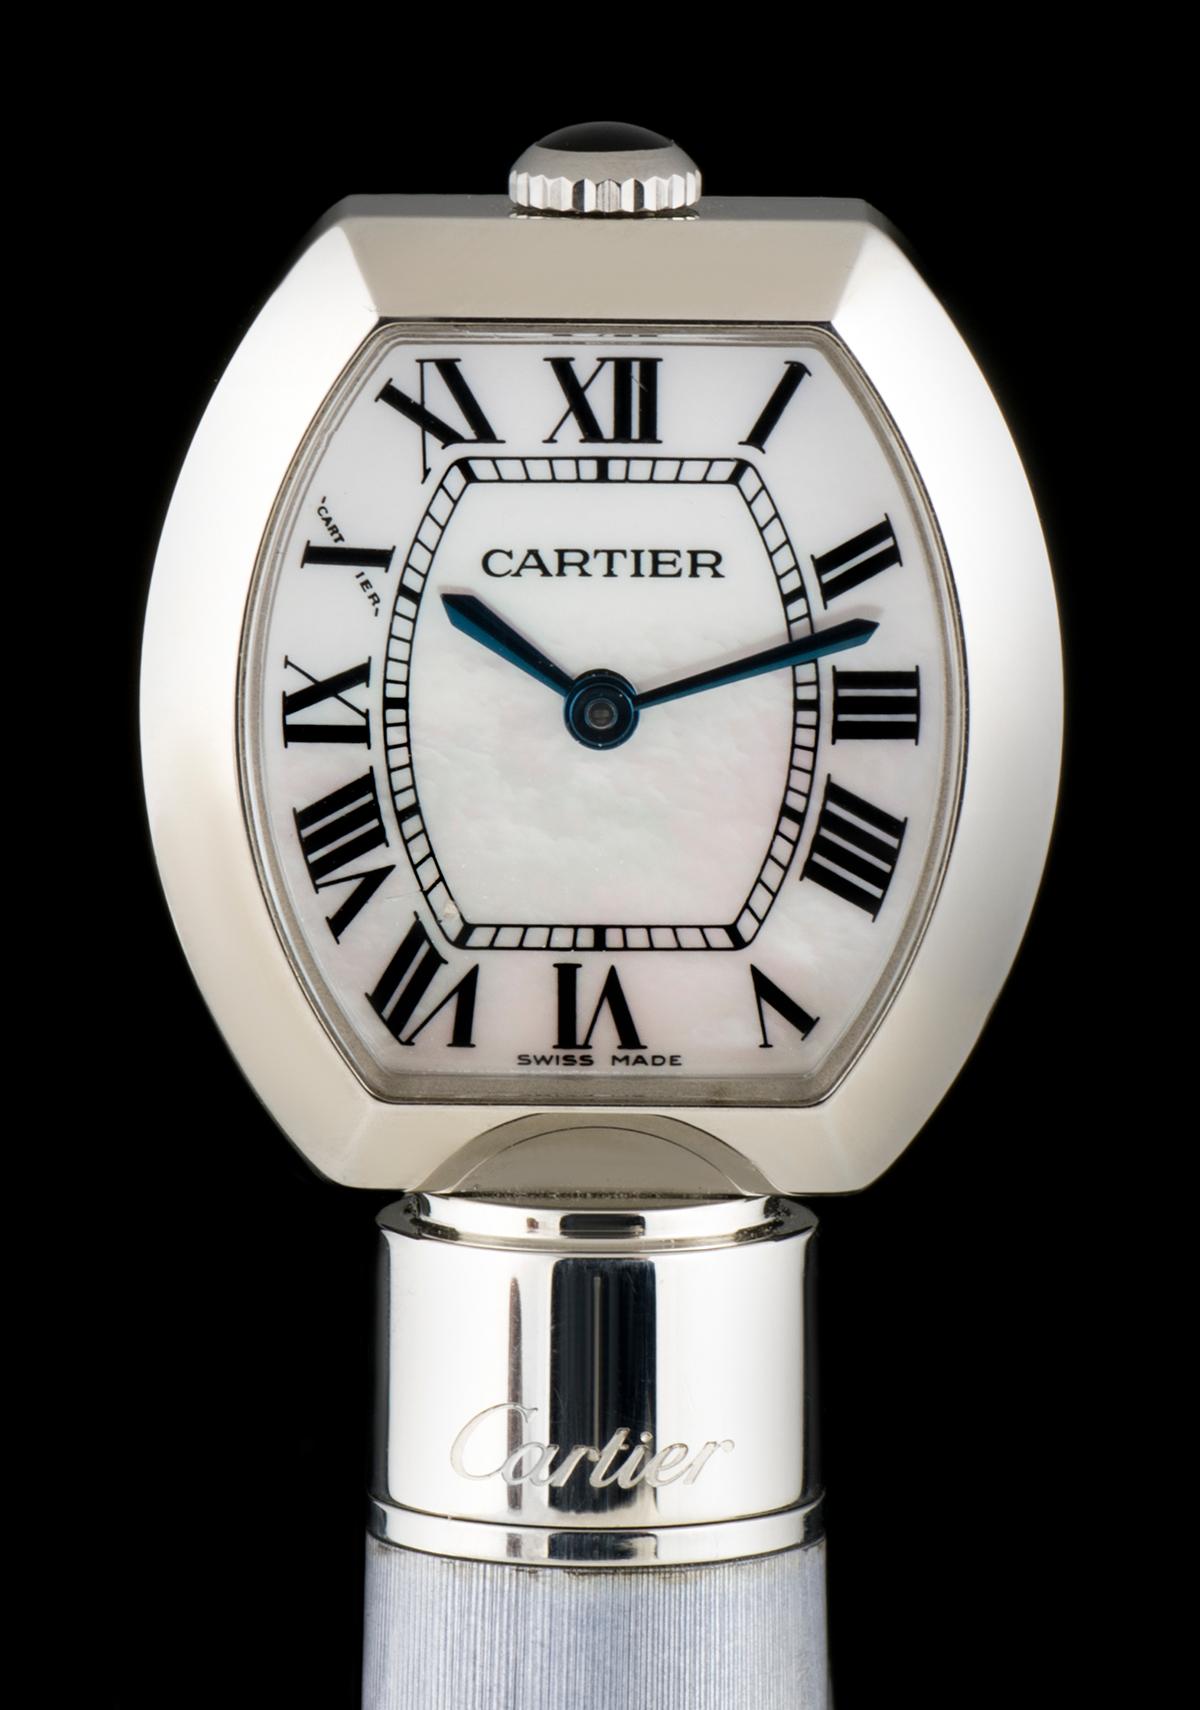 This stainless steel Ball Point Pen 22.5mm watch, by Cartier, is one of 2000 pieces ever manufactured and sold worldwide. 

The stainless steel pen case is finished with grey lacquer and platinum. At the top of the pen is a small quartz clock,